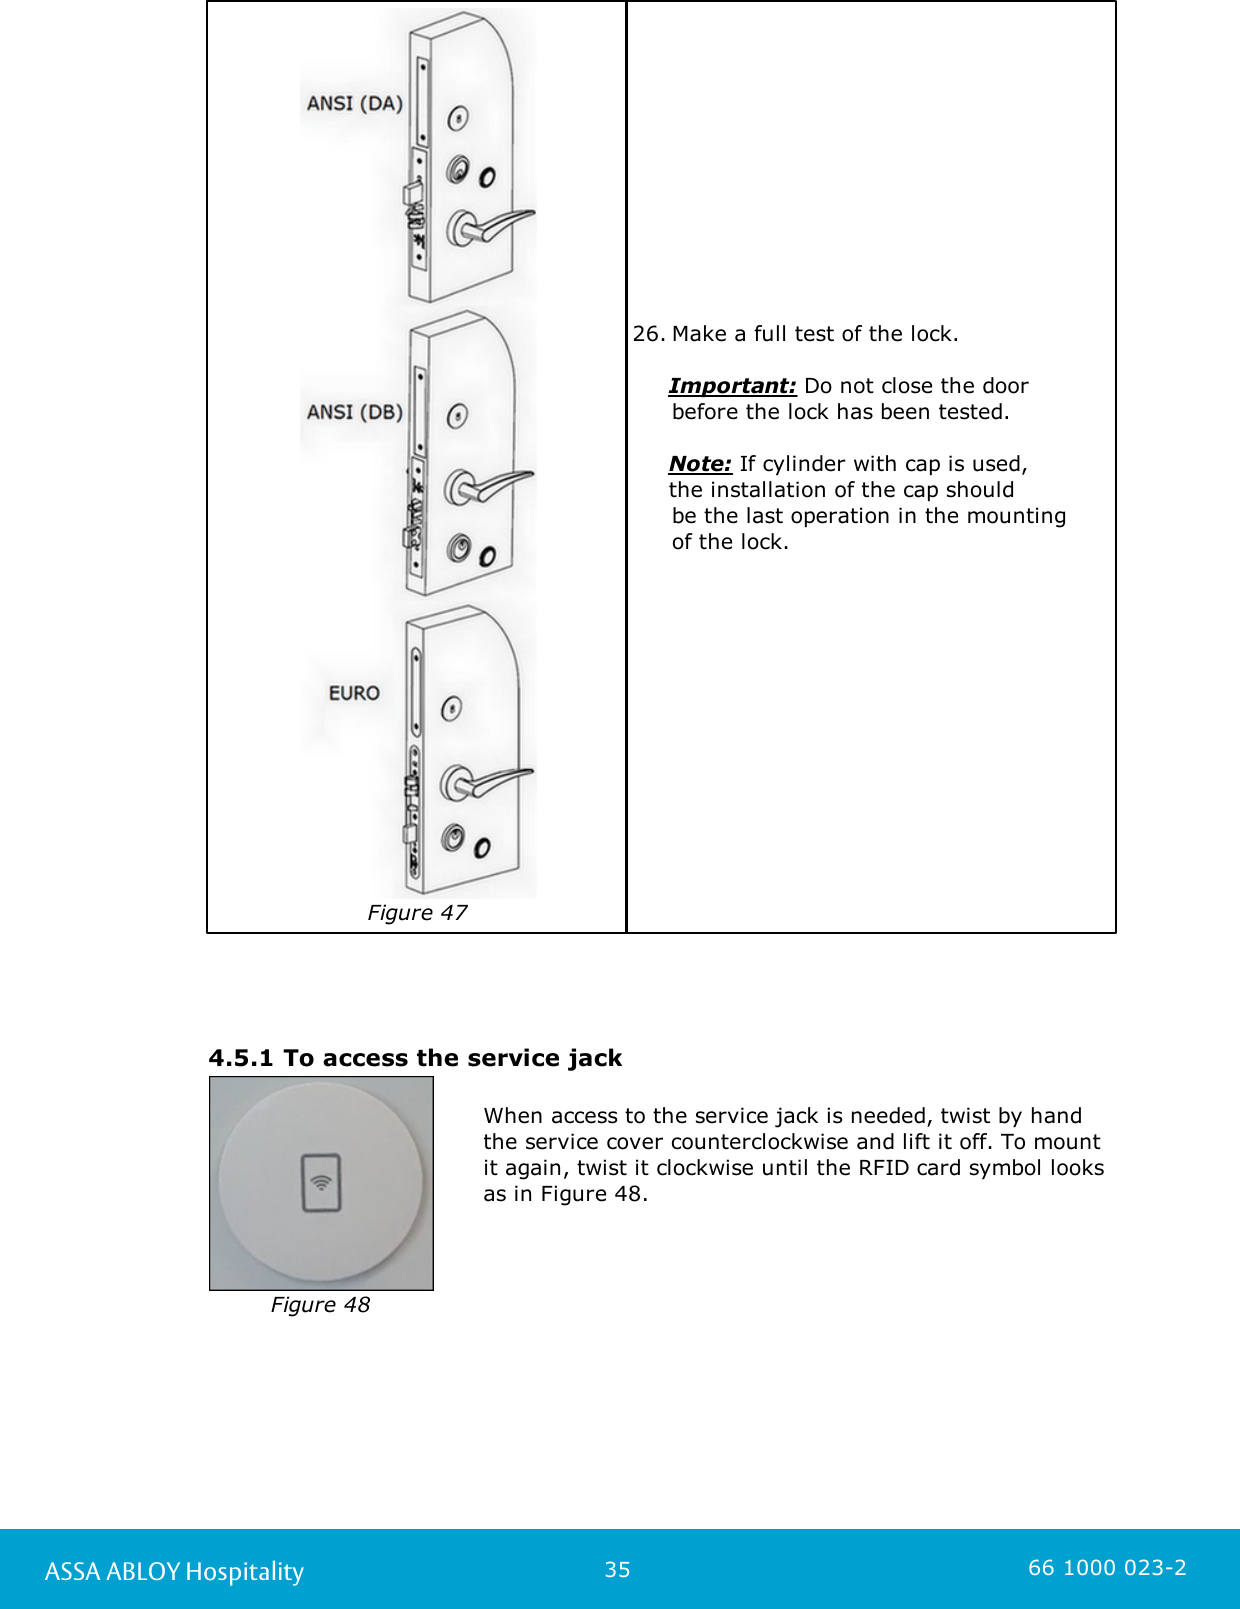 35ASSA ABLOY Hospitality 66 1000 023-2Figure 4726. Make a full test of the lock.      Important: Do not close the door before the lock has been tested.      Note: If cylinder with cap is used,      the installation of the cap should be the last operation in the mounting of the lock.  4.5.1 To access the service jackFigure 48When access to the service jack is needed, twist by handthe service cover counterclockwise and lift it off. To mountit again, twist it clockwise until the RFID card symbol looksas in Figure 48. 